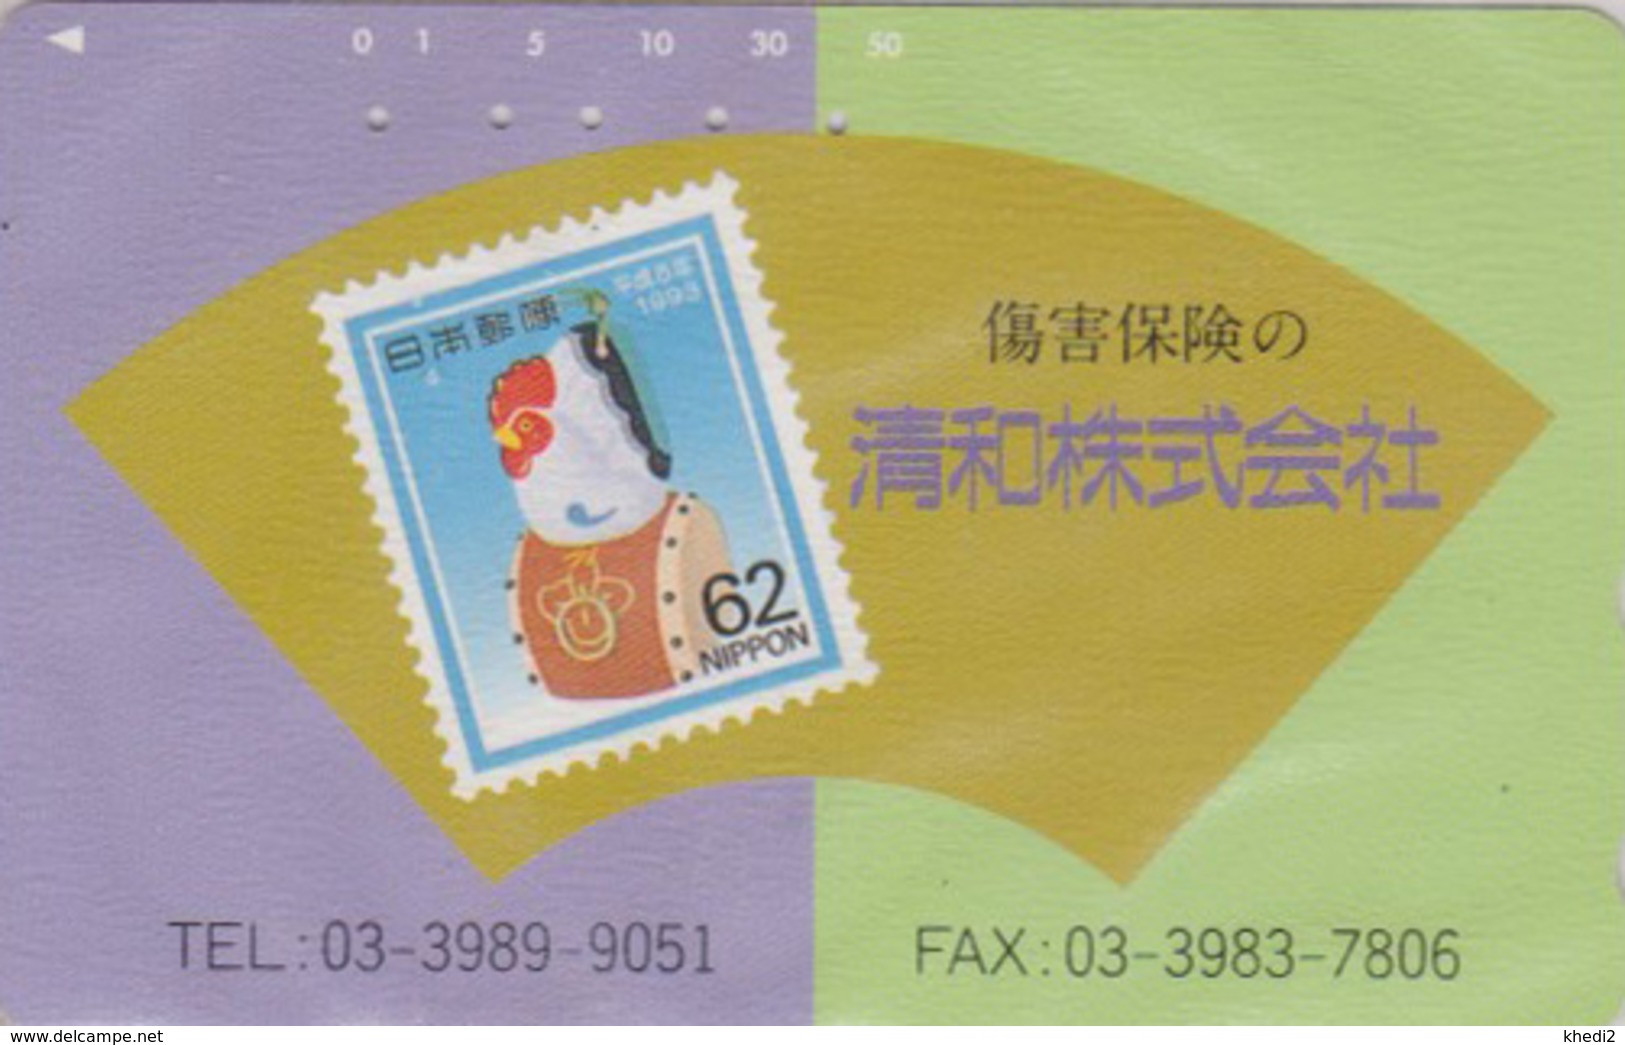 TC JAPON / 110-140314 - ZODIAQUE - COQ Sur TIMBRE - YEAR OF THE COCK Horoscope On STAMP JAPAN Free Phonecard - 160 - Timbres & Monnaies